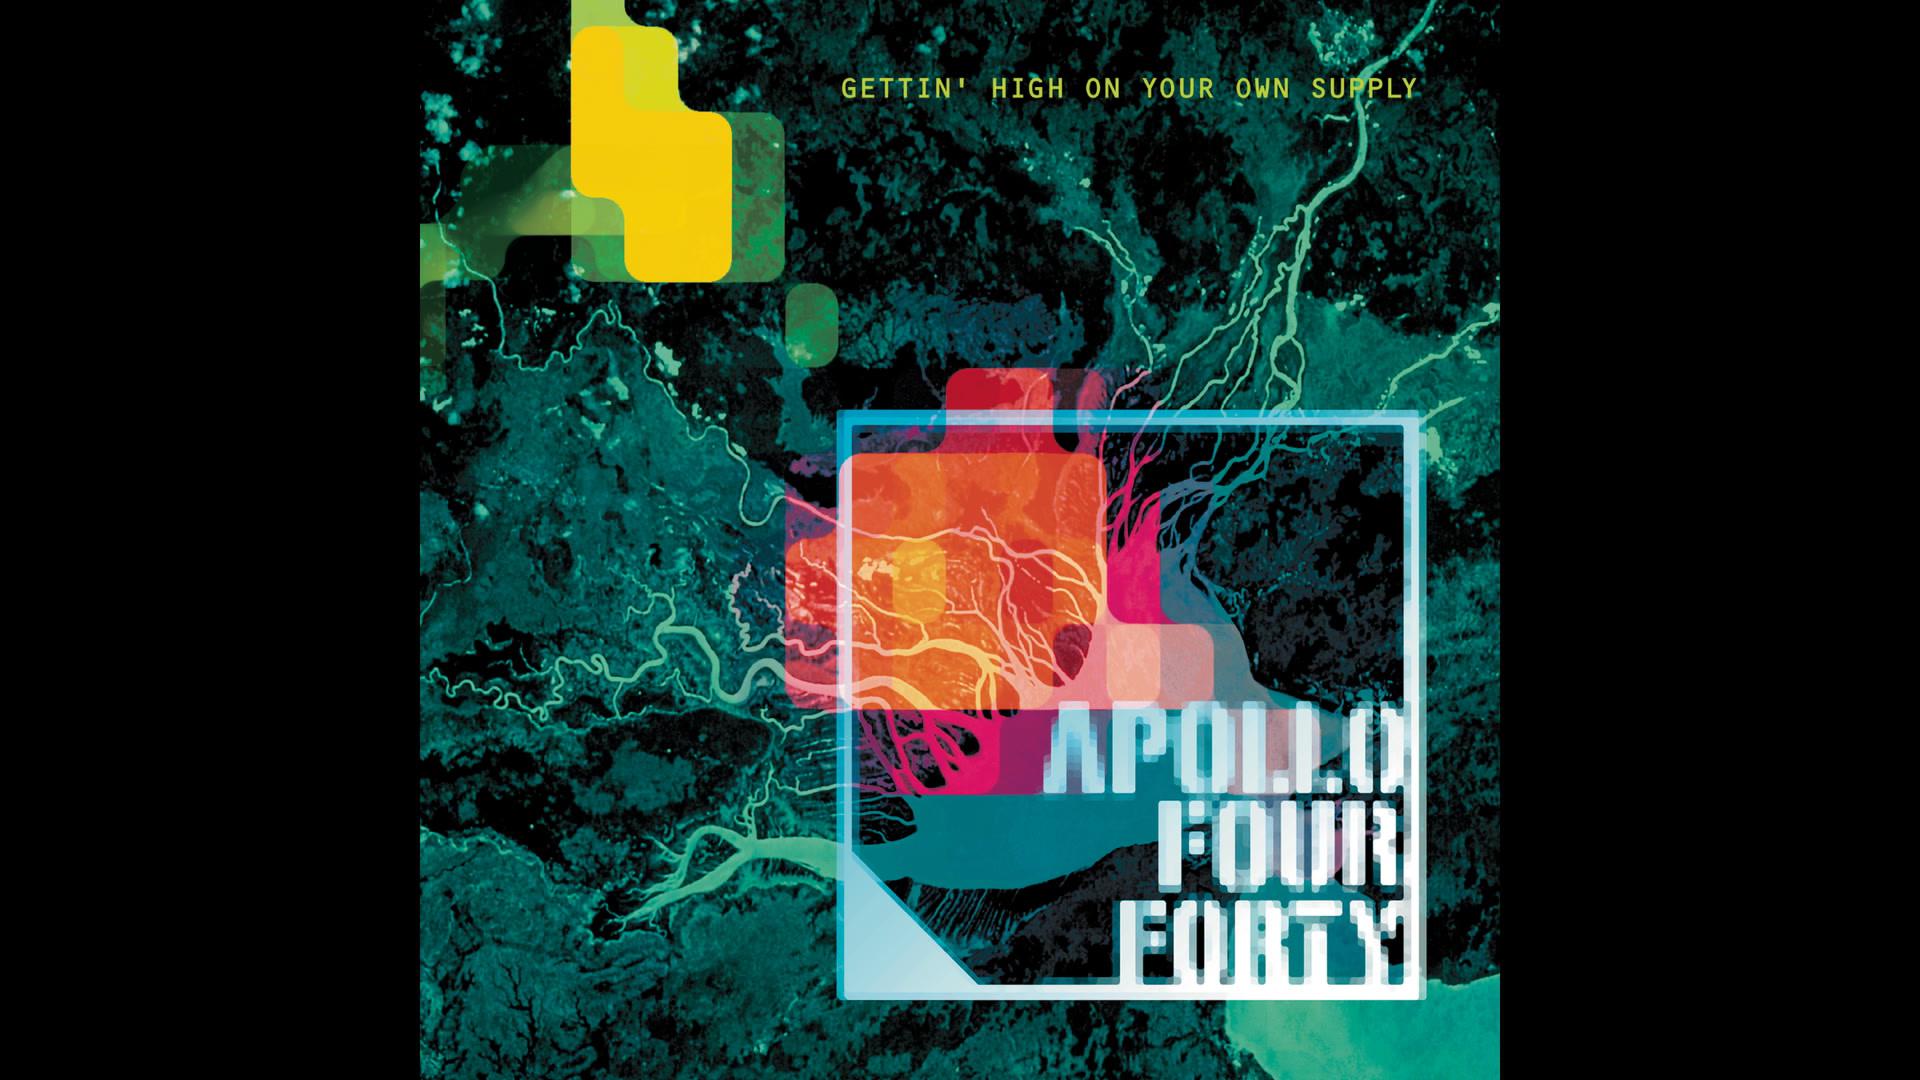 Apollo 440 - For Forty Days (Instrumental Version) [Official Audio]